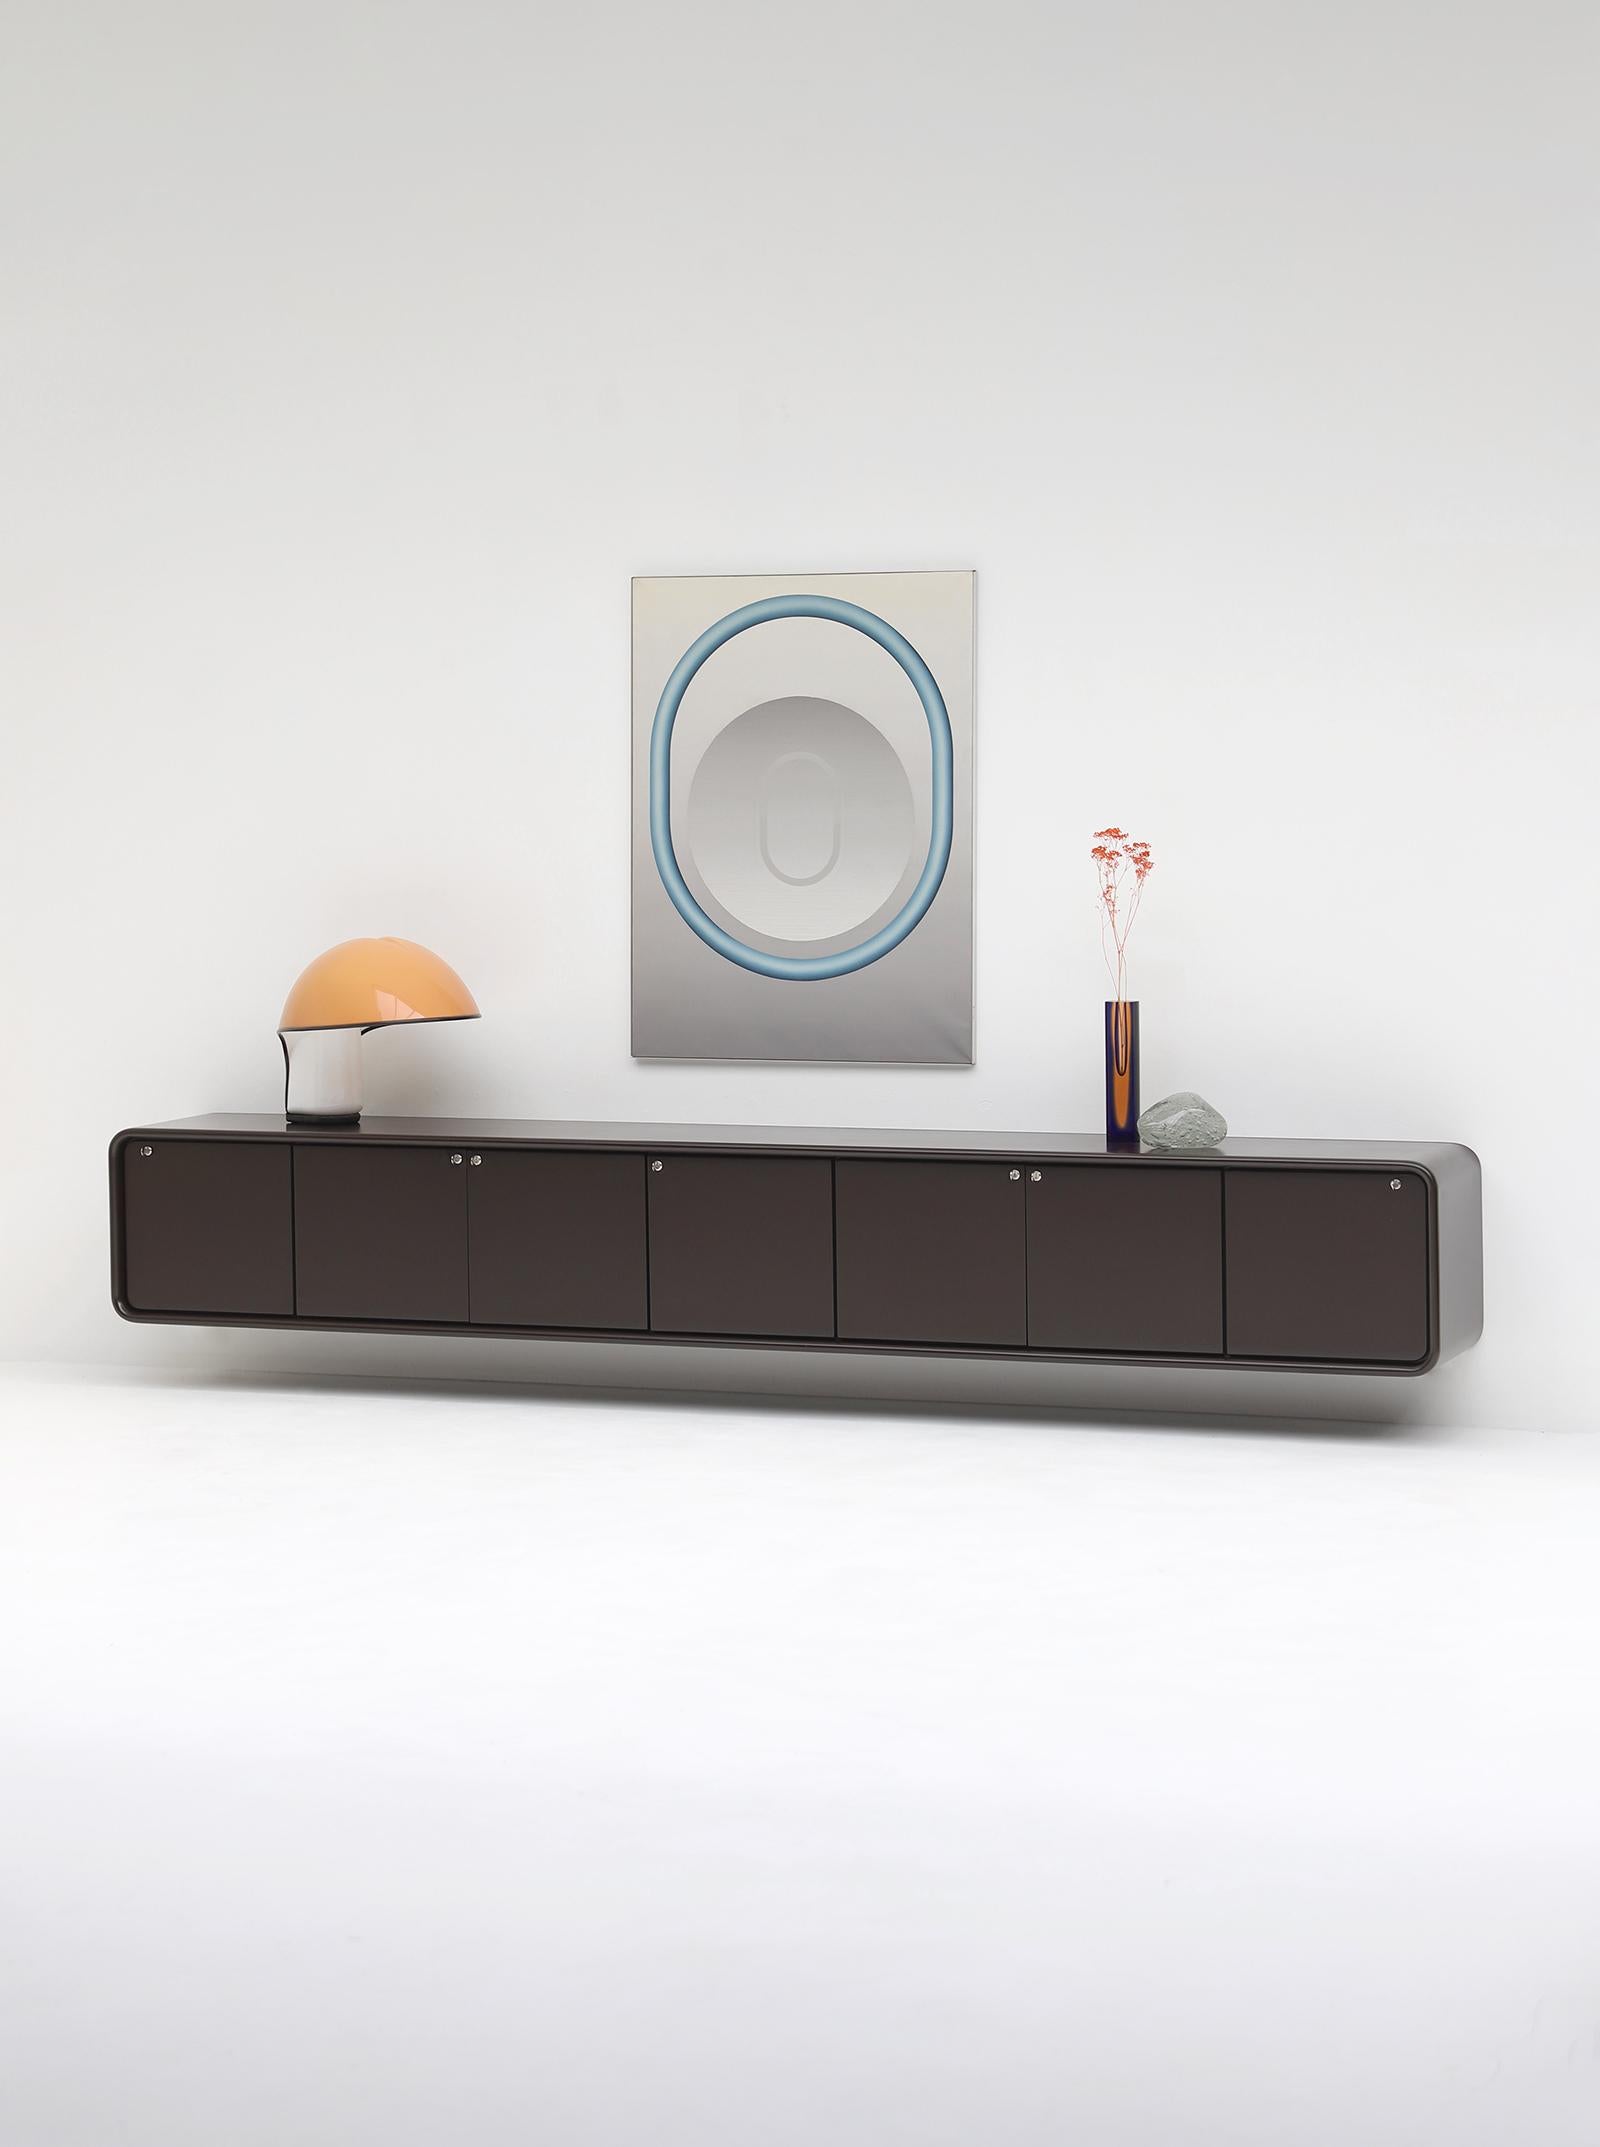 Lacquered Minimalistic Floating Sideboard 'Janda' Designed by Frank De Clercq, 1972